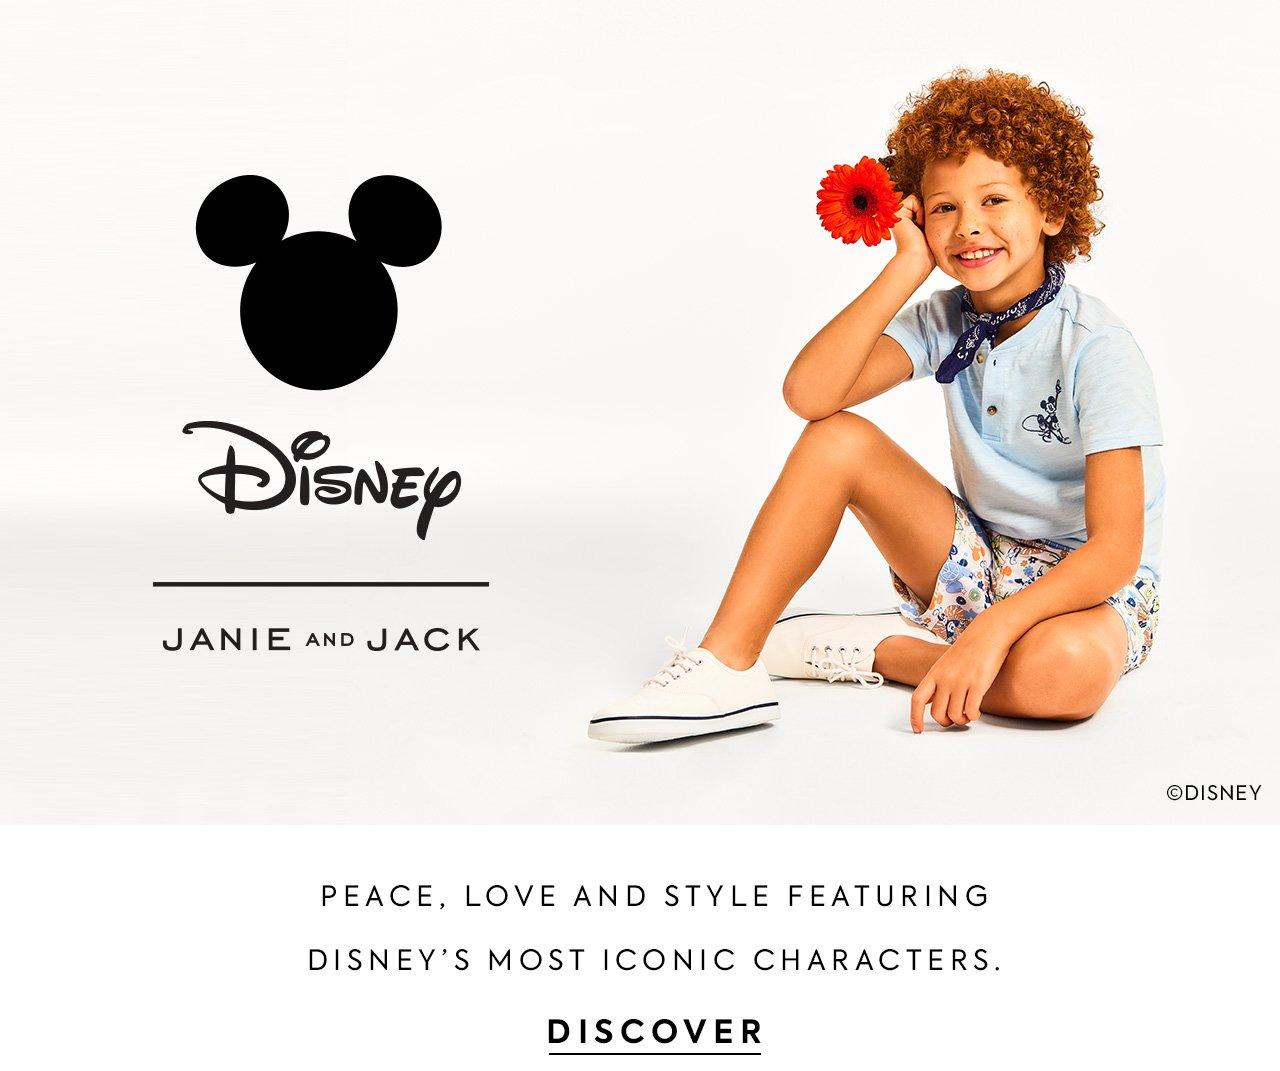 Peace, Love and style featuring Disney's most iconic characters. Shop Disney Mickey Mouse.